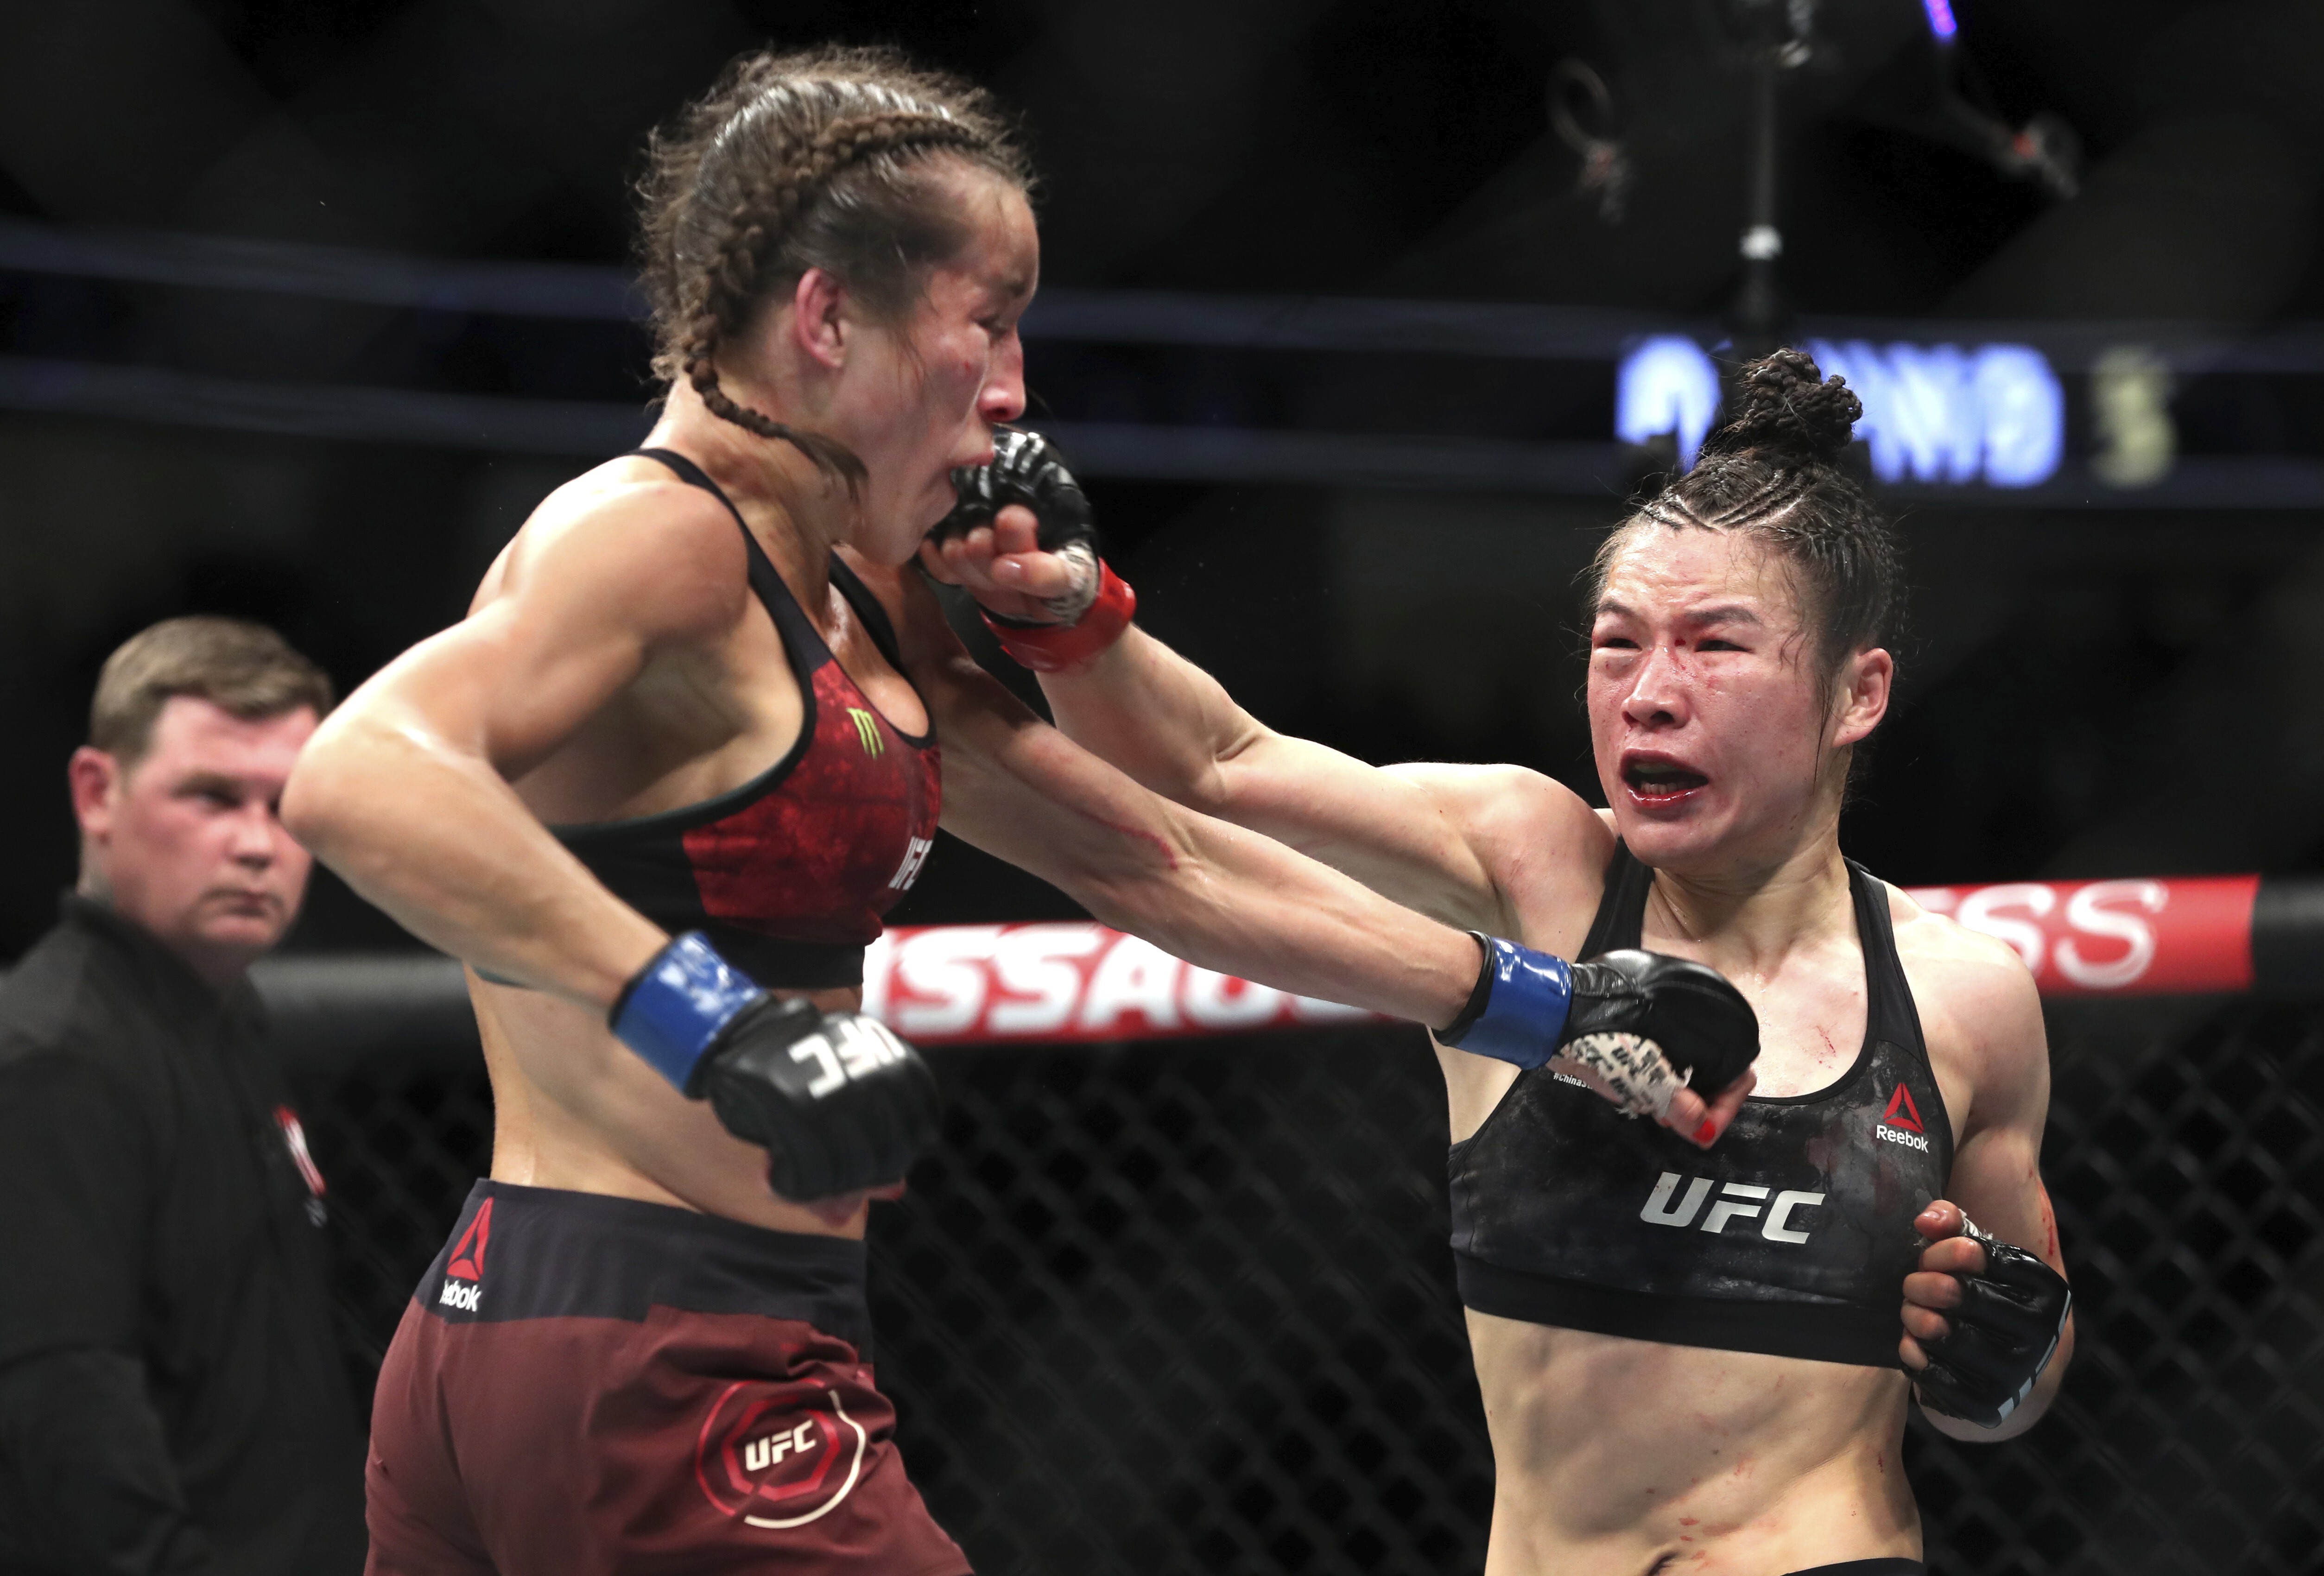 The five fighters UFC strawweight Zhang Weili could face next | South China Morning Post